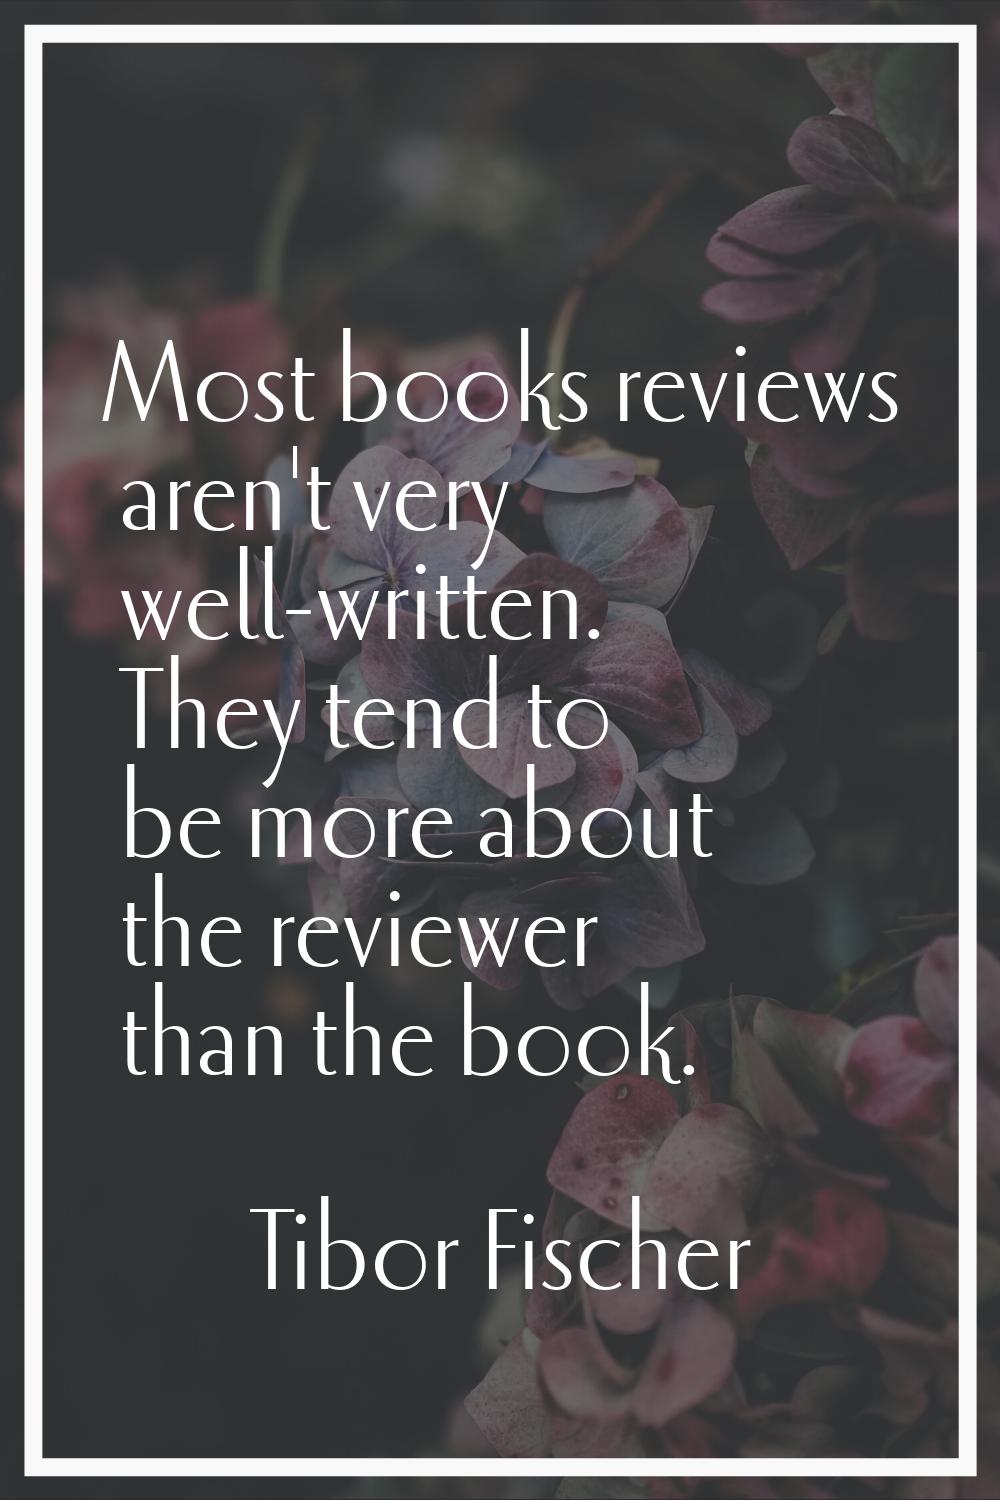 Most books reviews aren't very well-written. They tend to be more about the reviewer than the book.